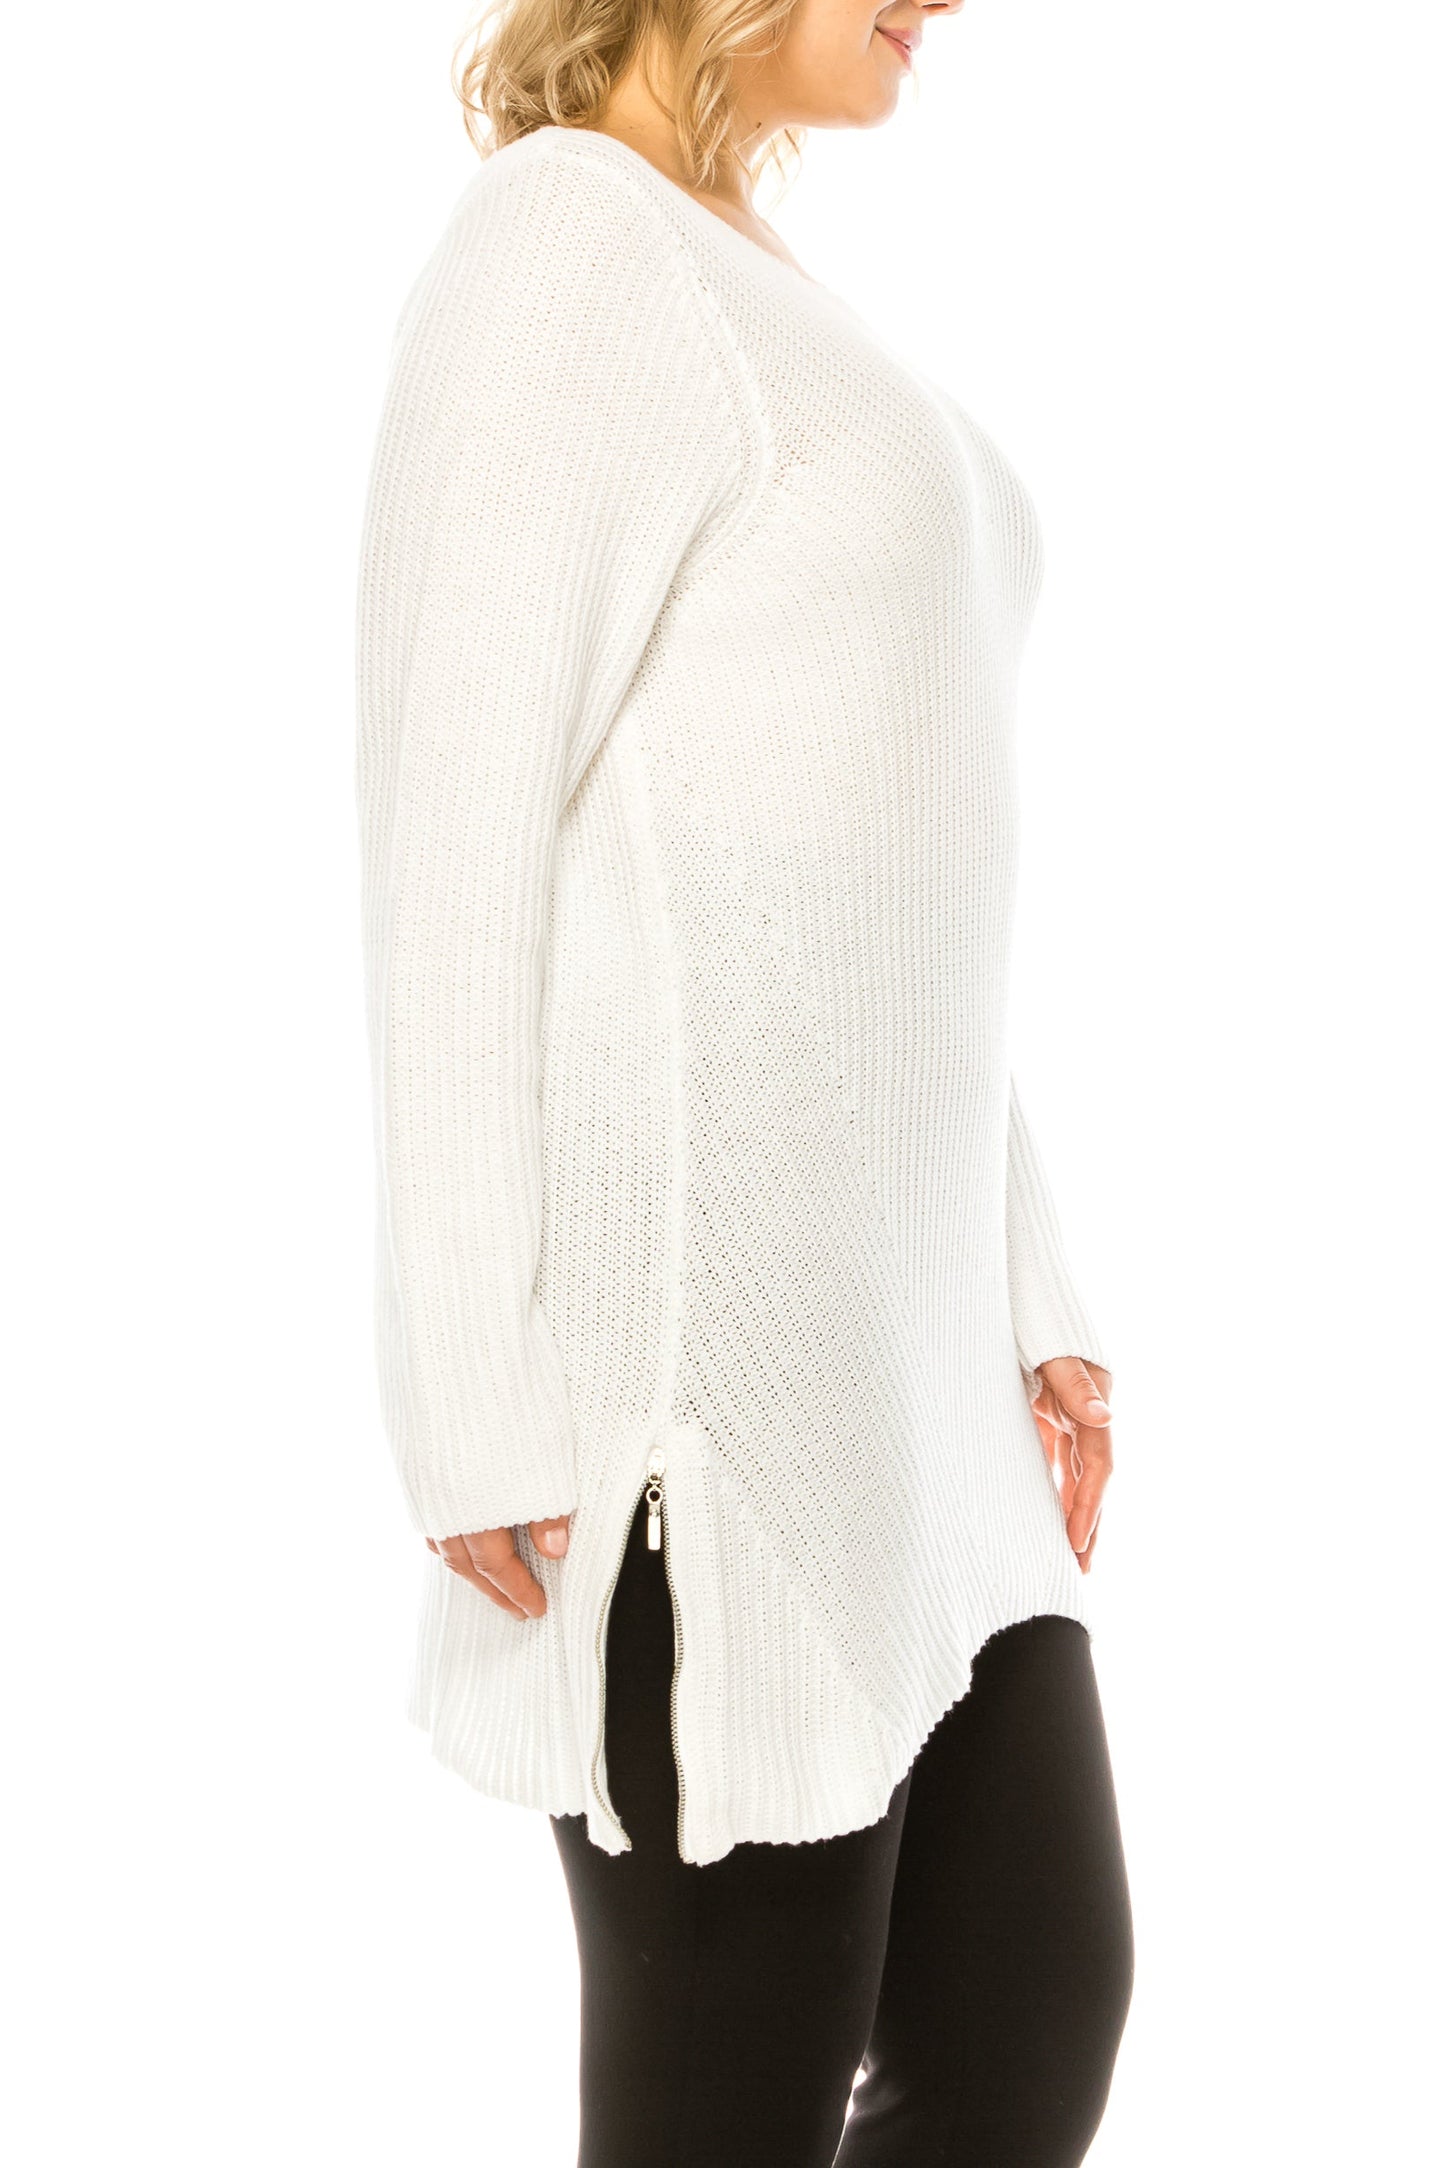 Nygard White Long Sleeve Tunic with Side Zipper Detail